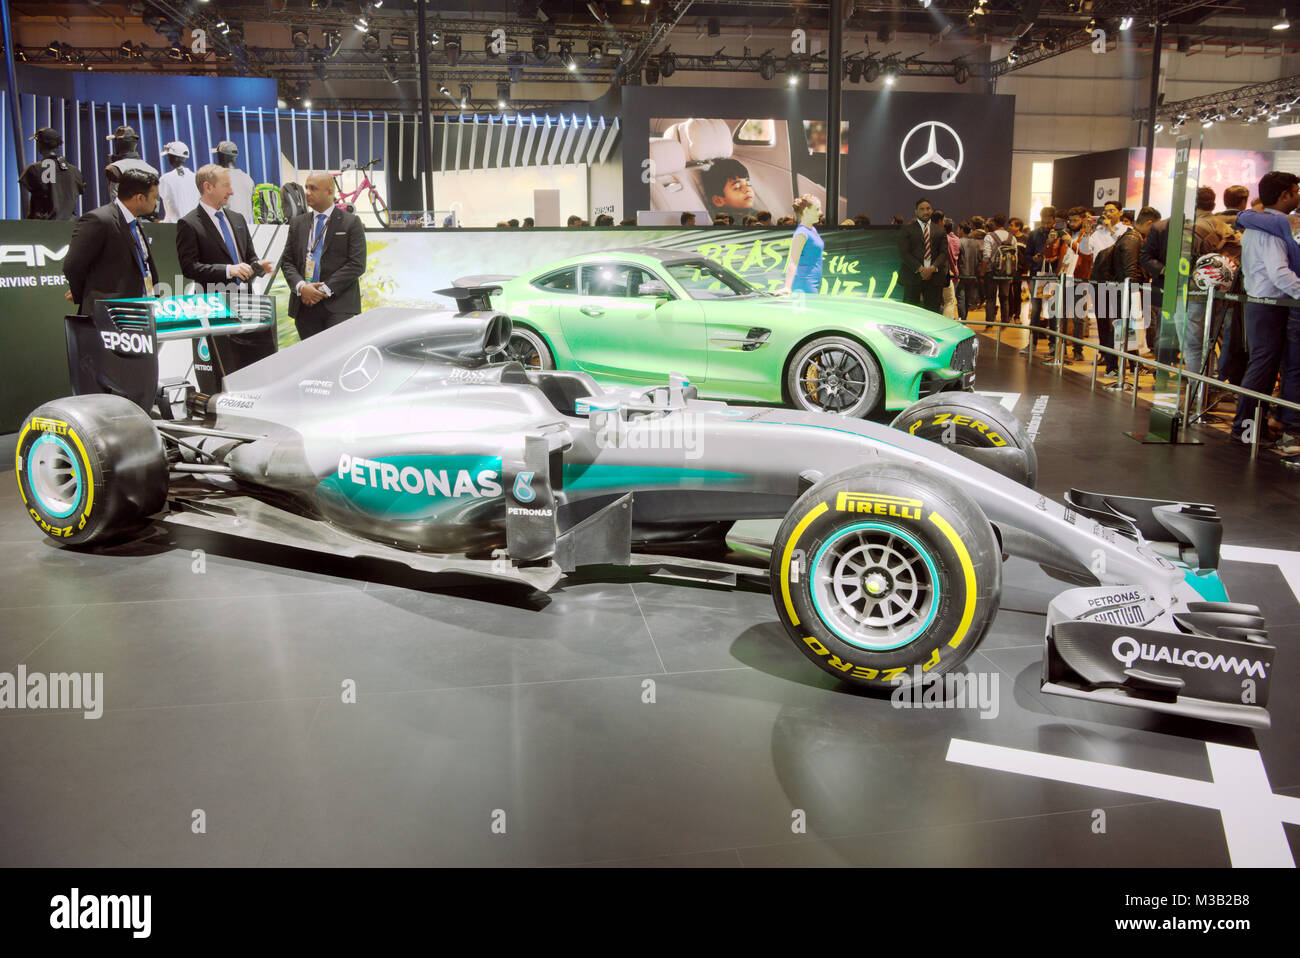 Greater Noida, India. 9th February 2018. Mercedes-AMG Petronas F1 team car is on display at the Auto Expo 2018 at India Expo Mart in Greater Noida, India. The Auto Expo is a biennial event and is being held during 9th to 14th February 2018. Credit: Karunesh Johri/Alamy Live News. Stock Photo